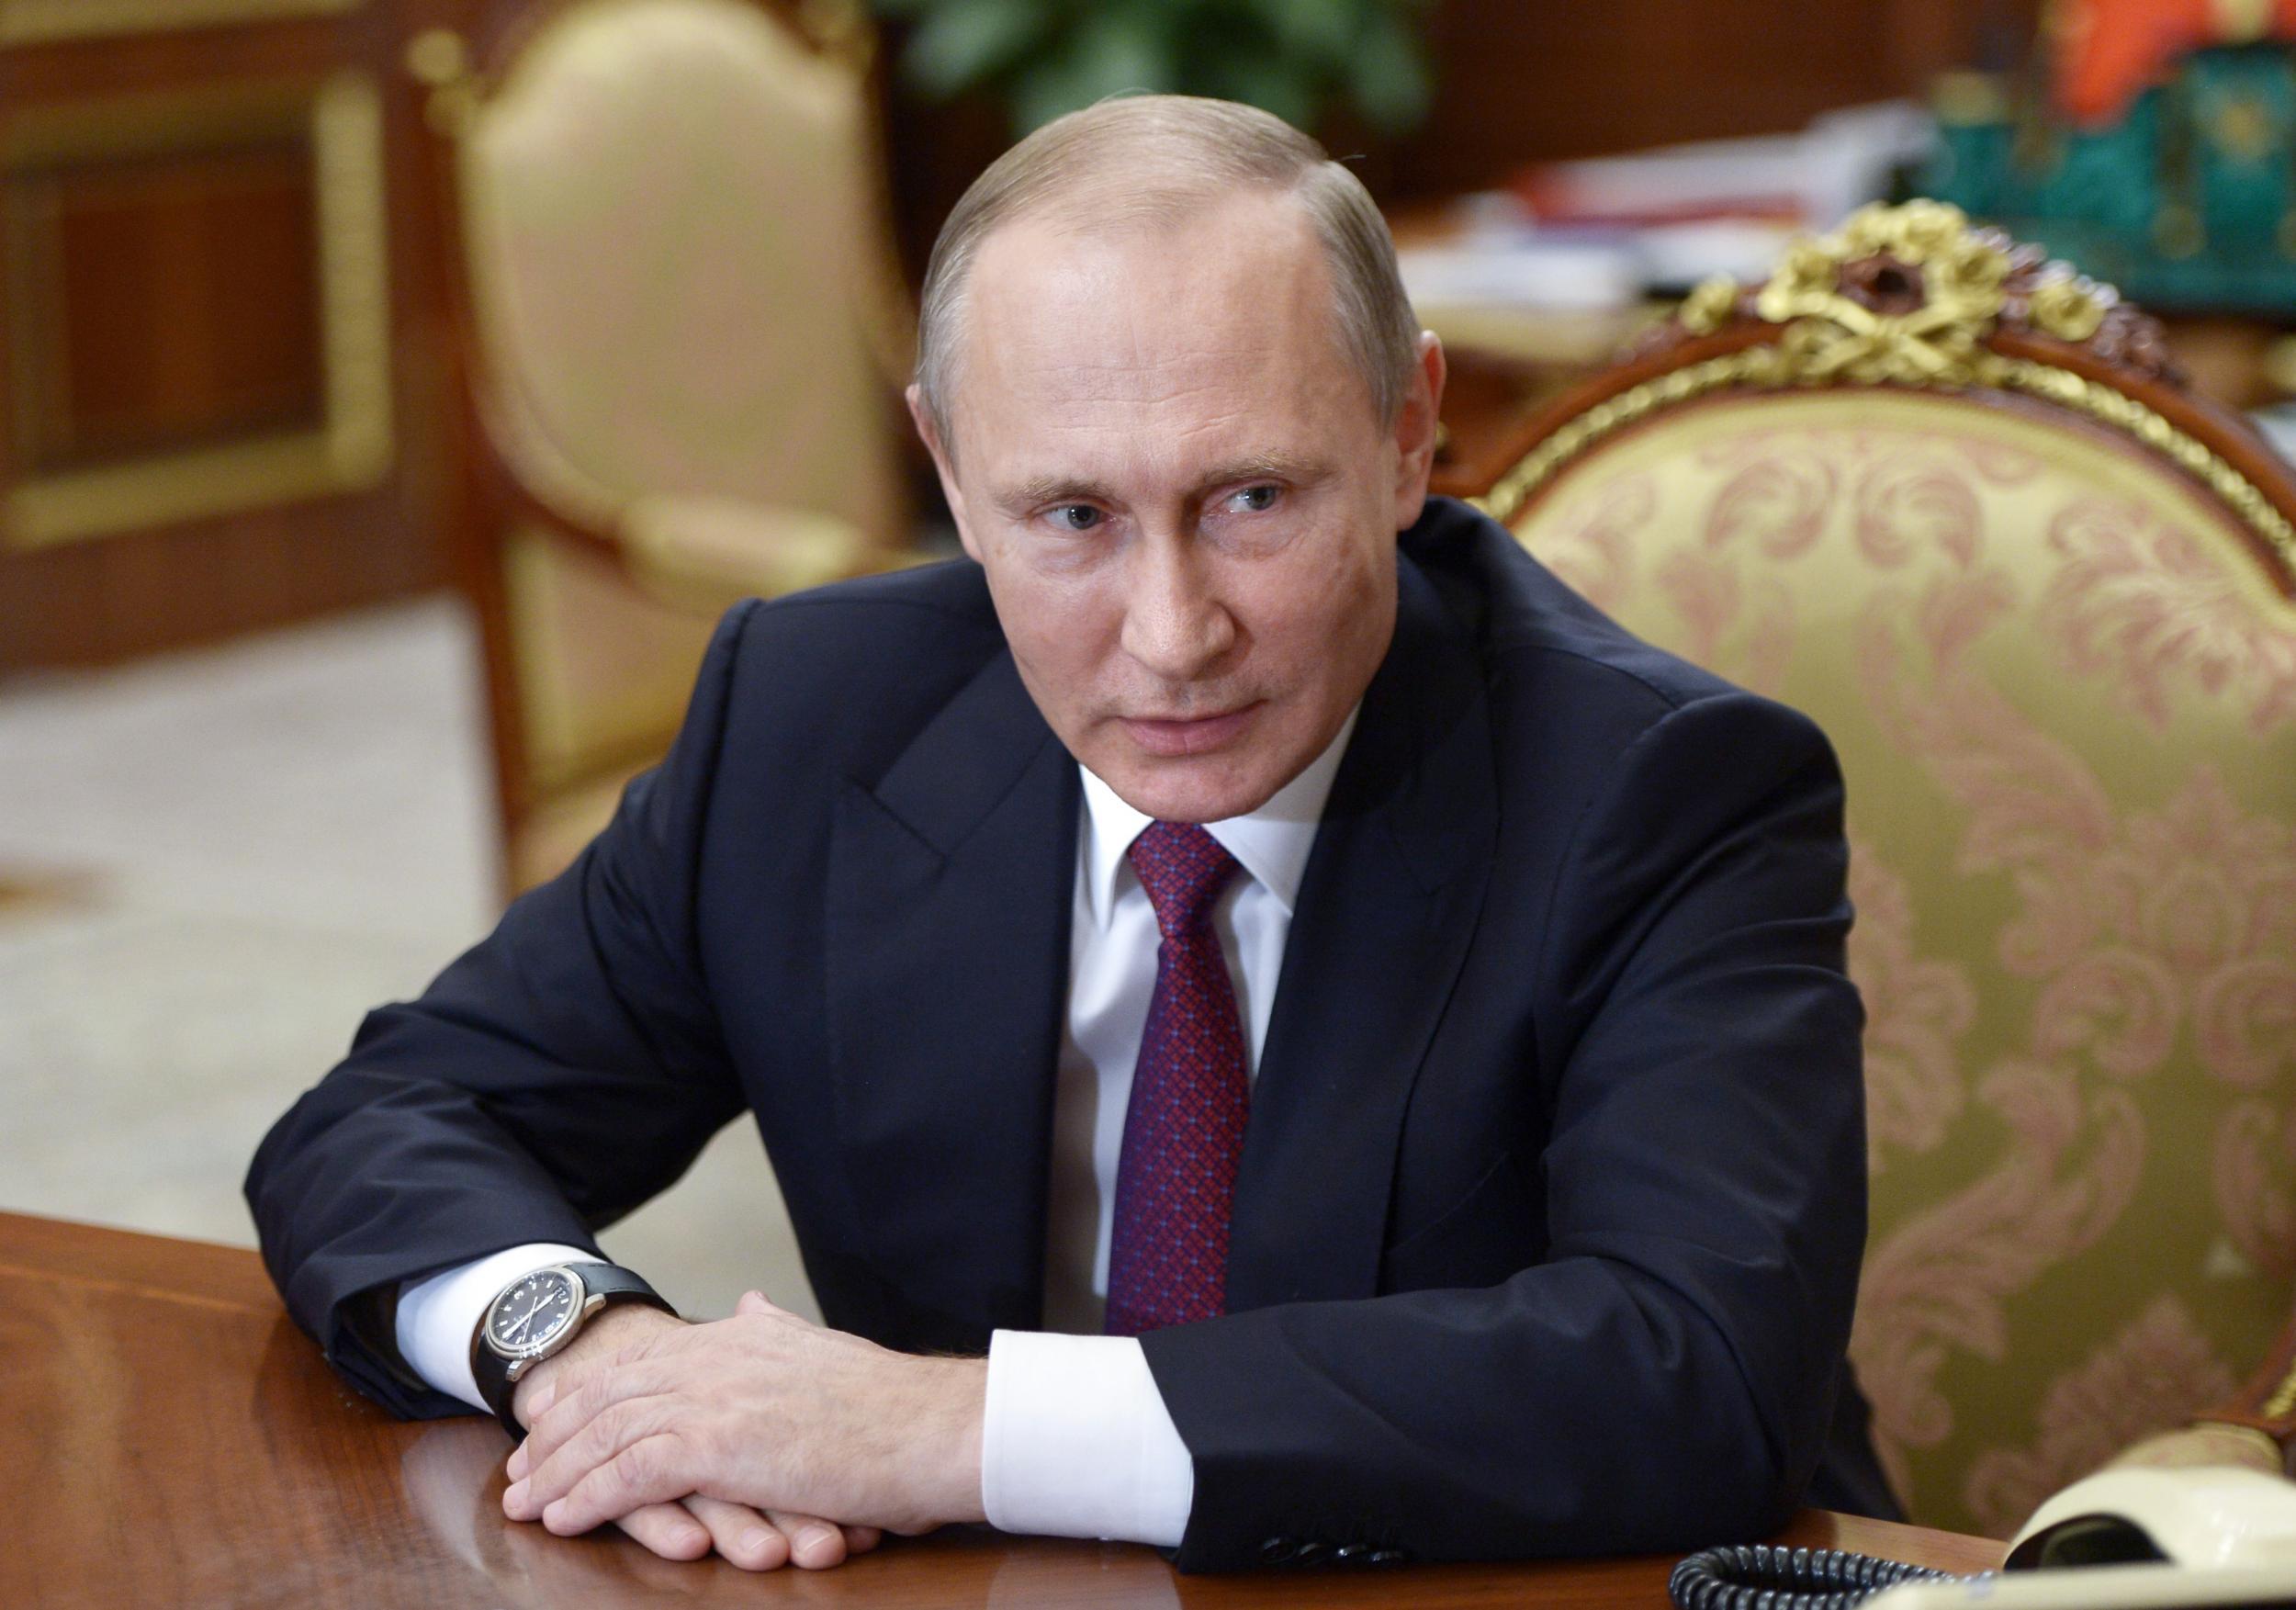 President Vladimir Putin denies Moscow is responsible for cyber attacks on US organisations